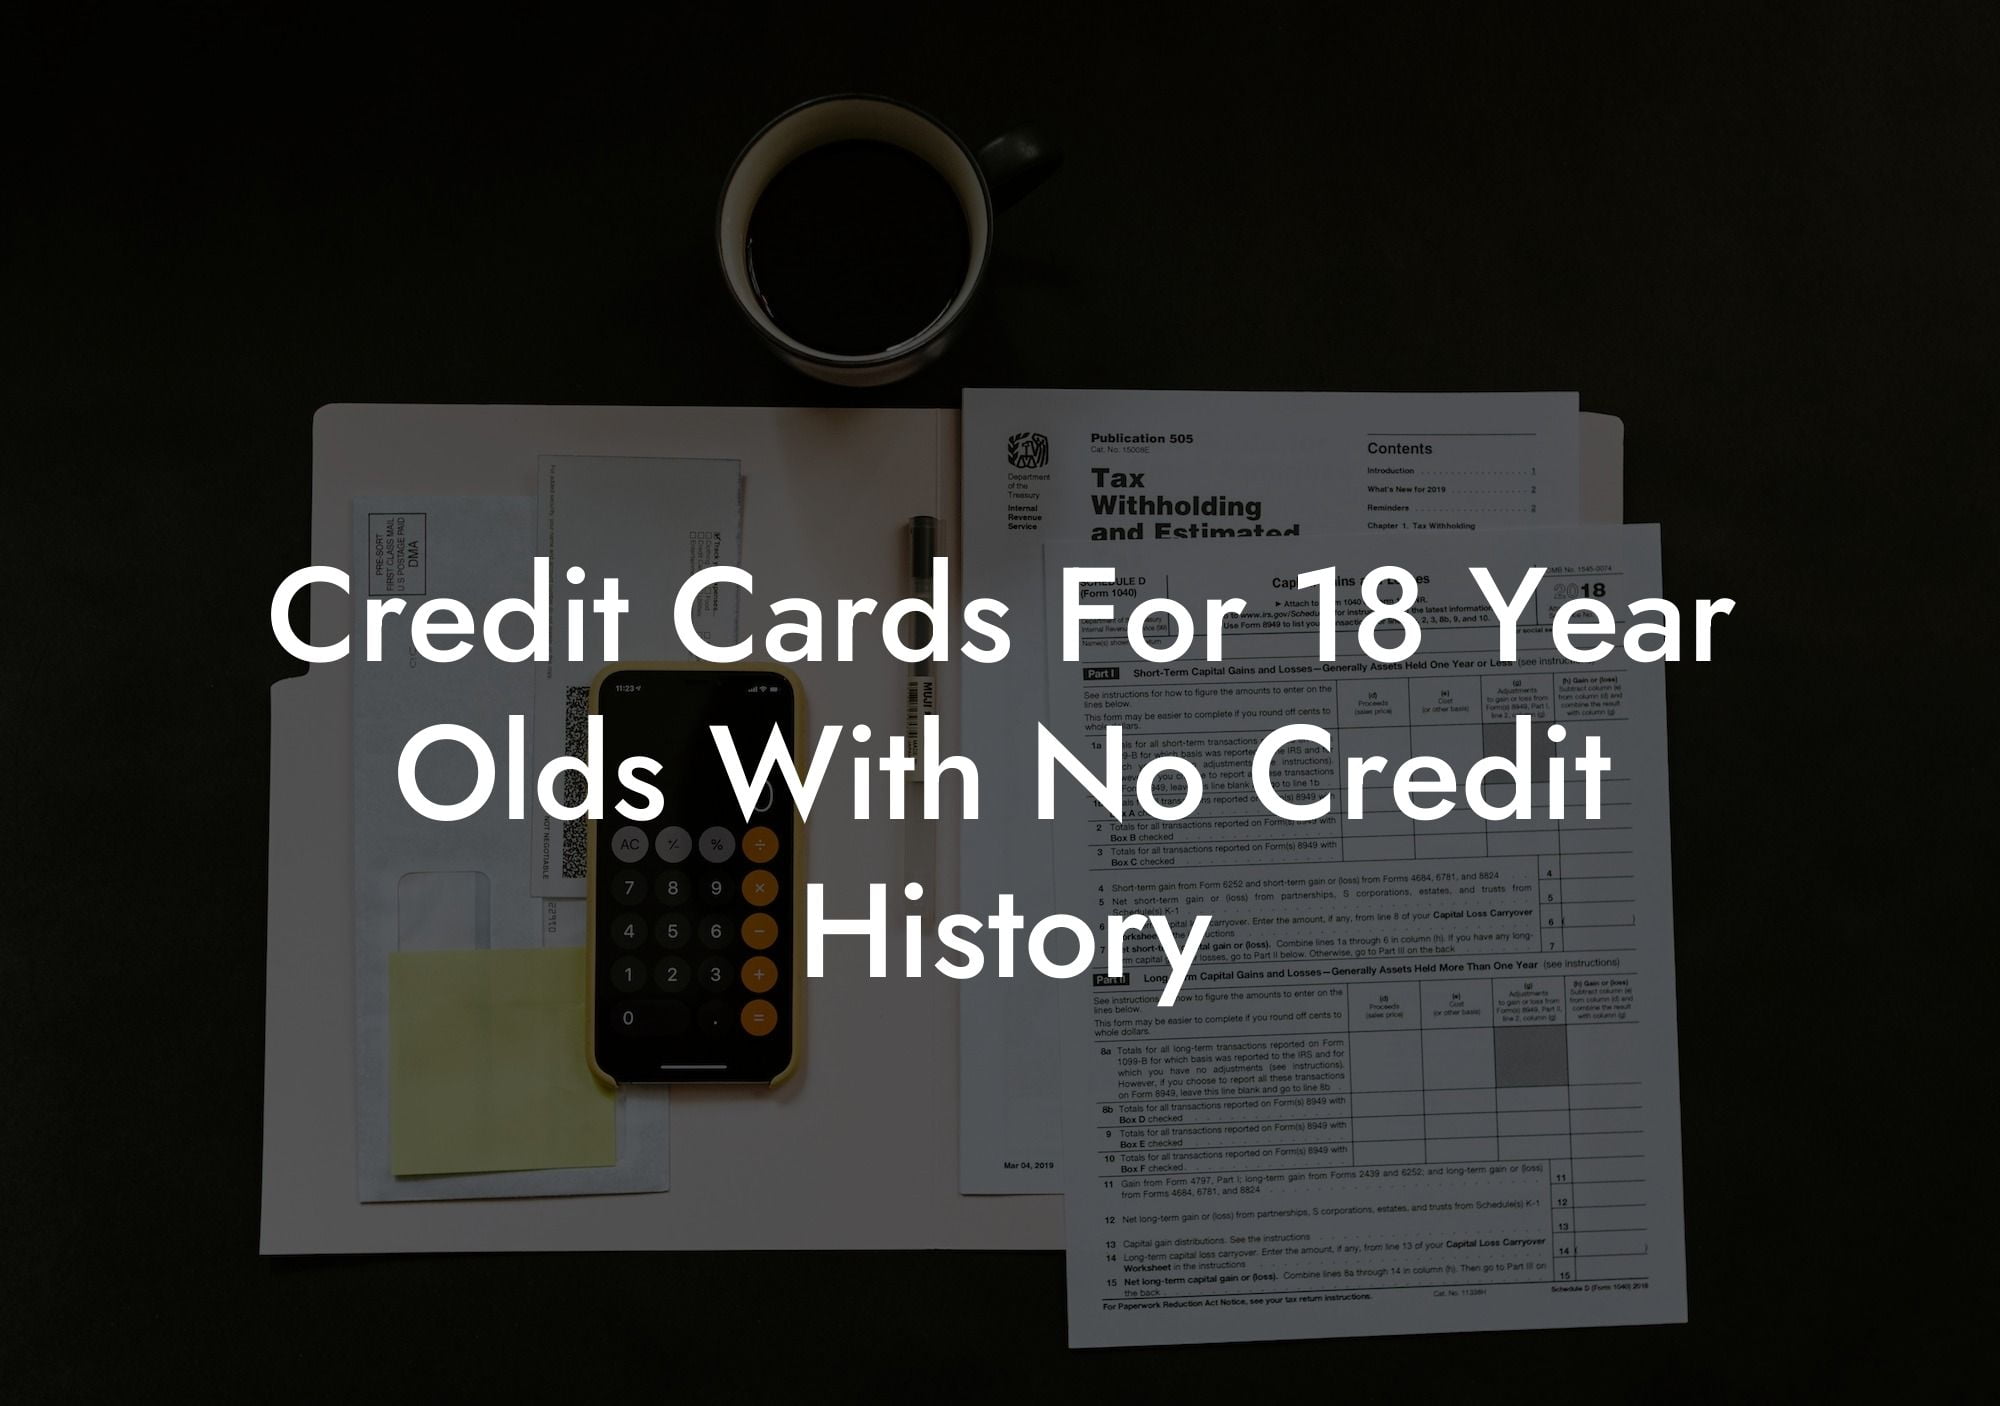 Credit Cards For 18 Year Olds With No Credit History